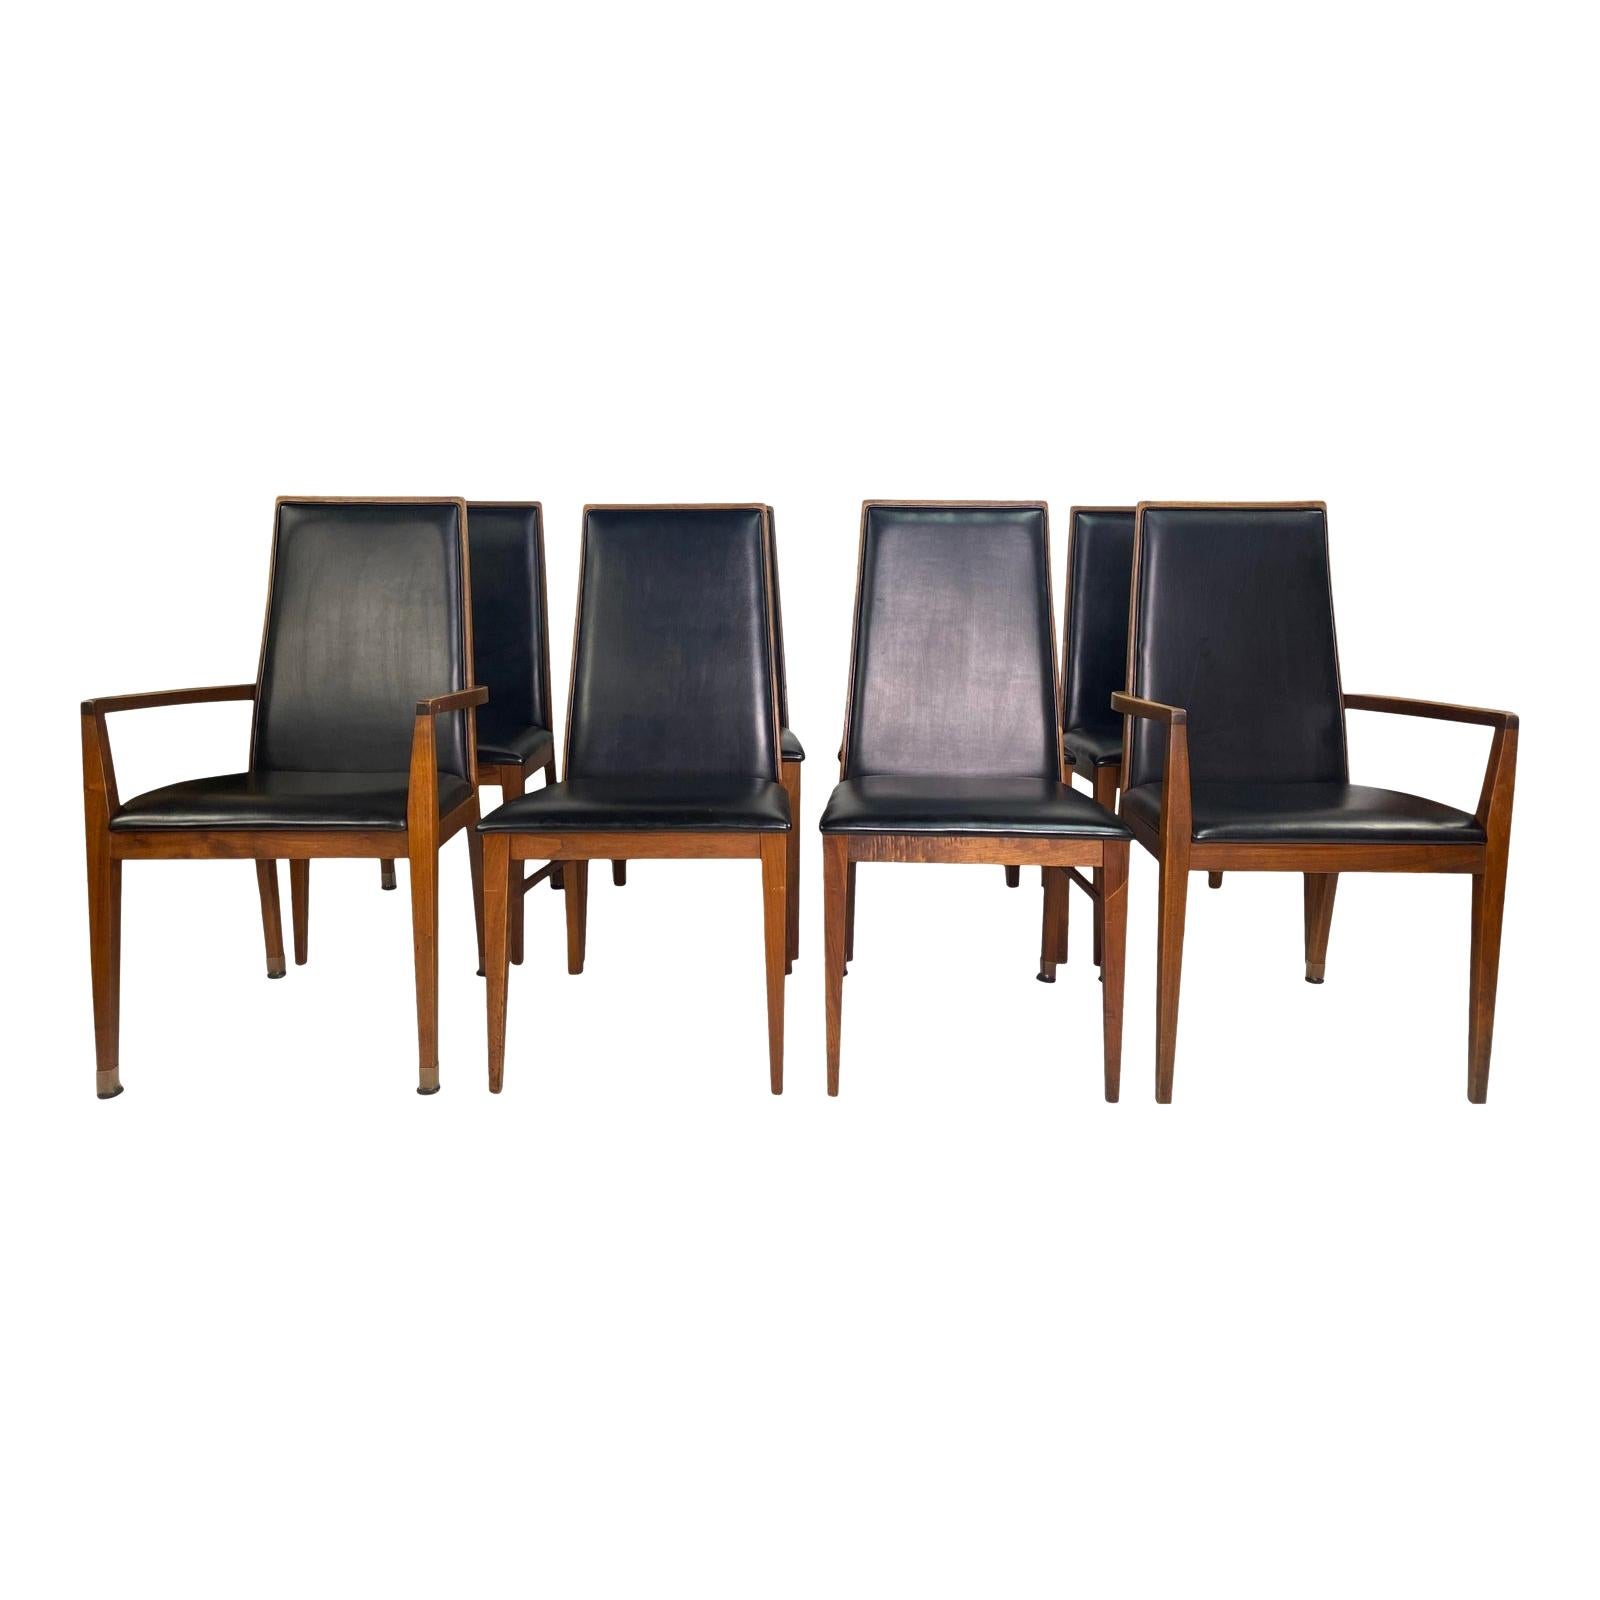 Milo Baughman Style Walnut Dining Chairs by Dillingham, Set of 2 armless 